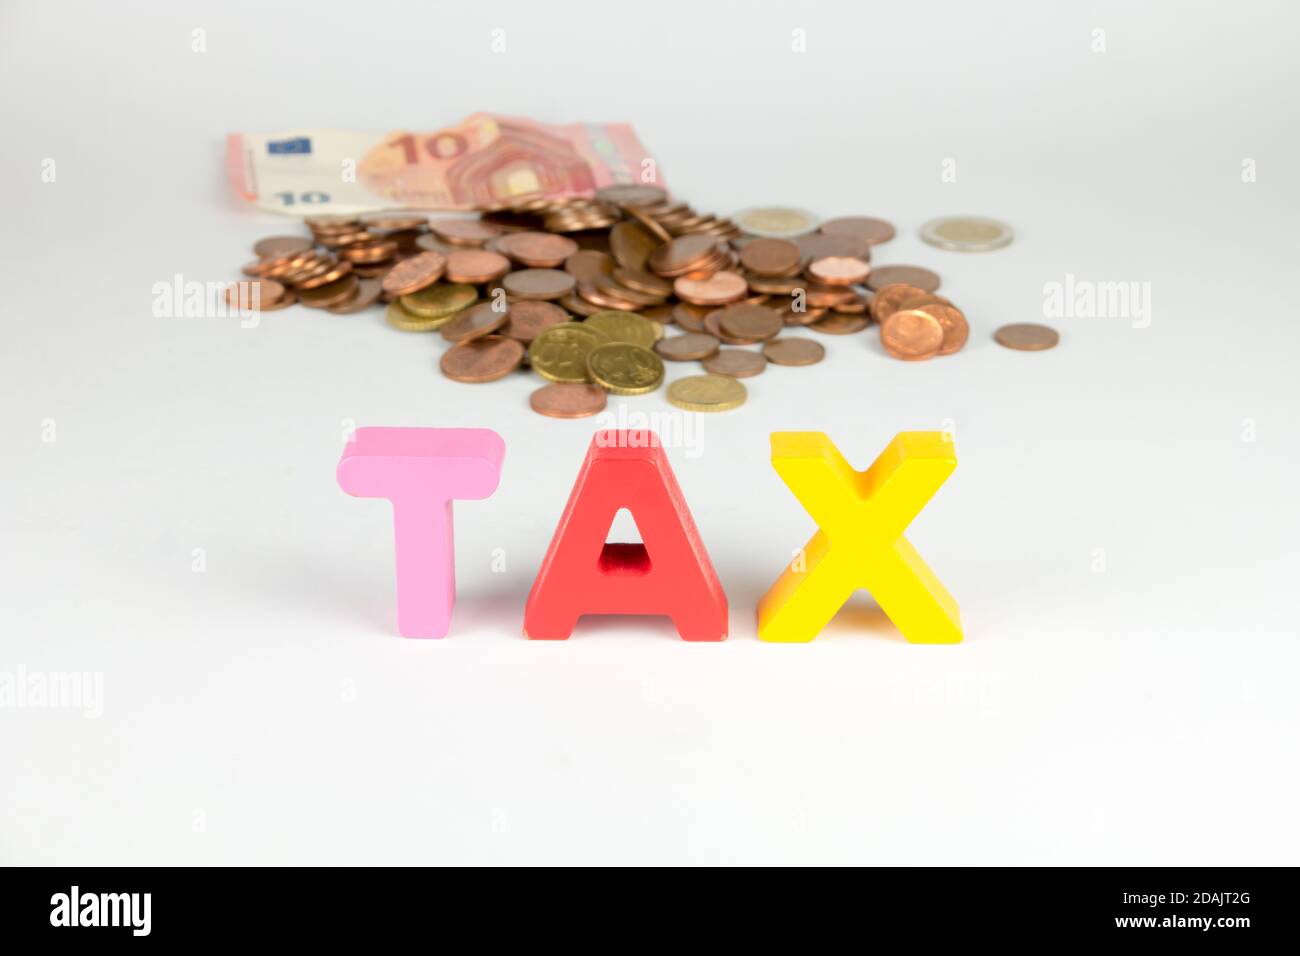 Tax paying. Sign tax with Euro coins and banknote behind it on white background. Tax payment concept. Stock Photo